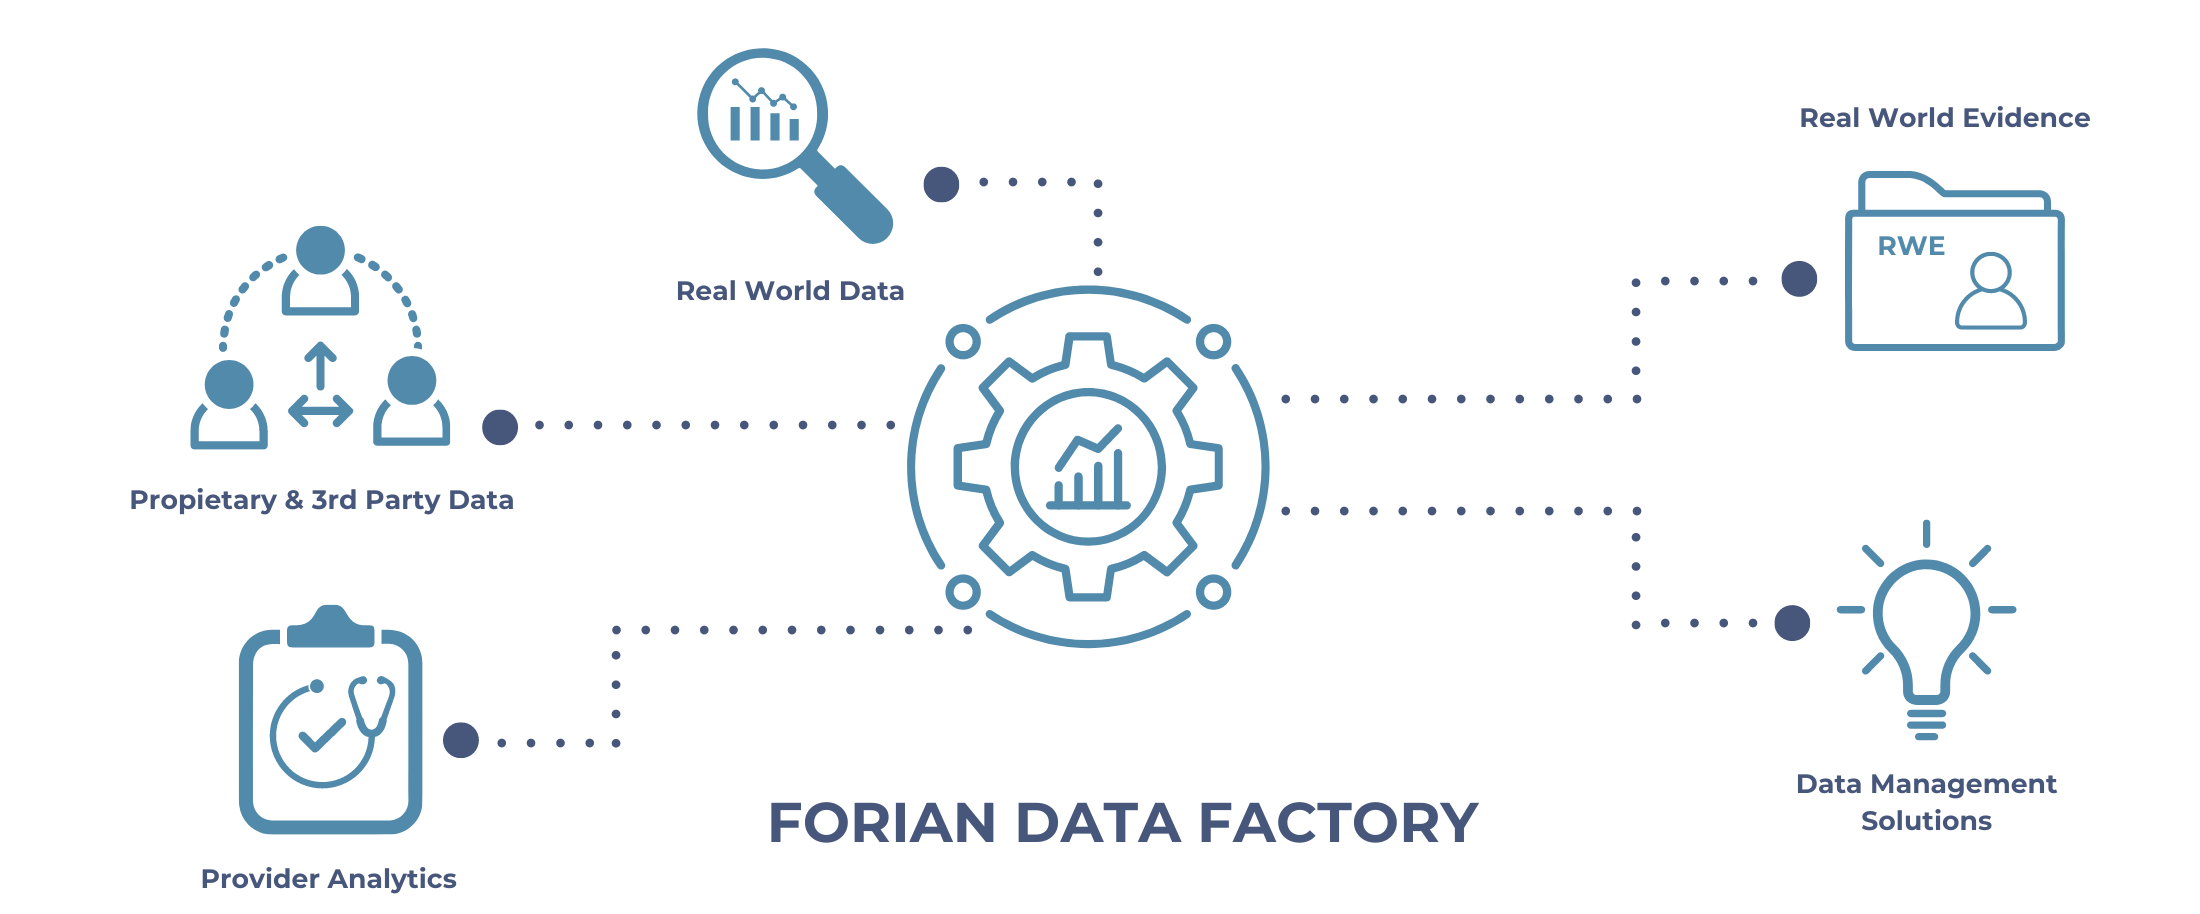 The Forian Data Factory uses proprietary and third party data to create biotrack & cannalytics, commercial analytics, real world evidence & patient registries, and data management solutions.